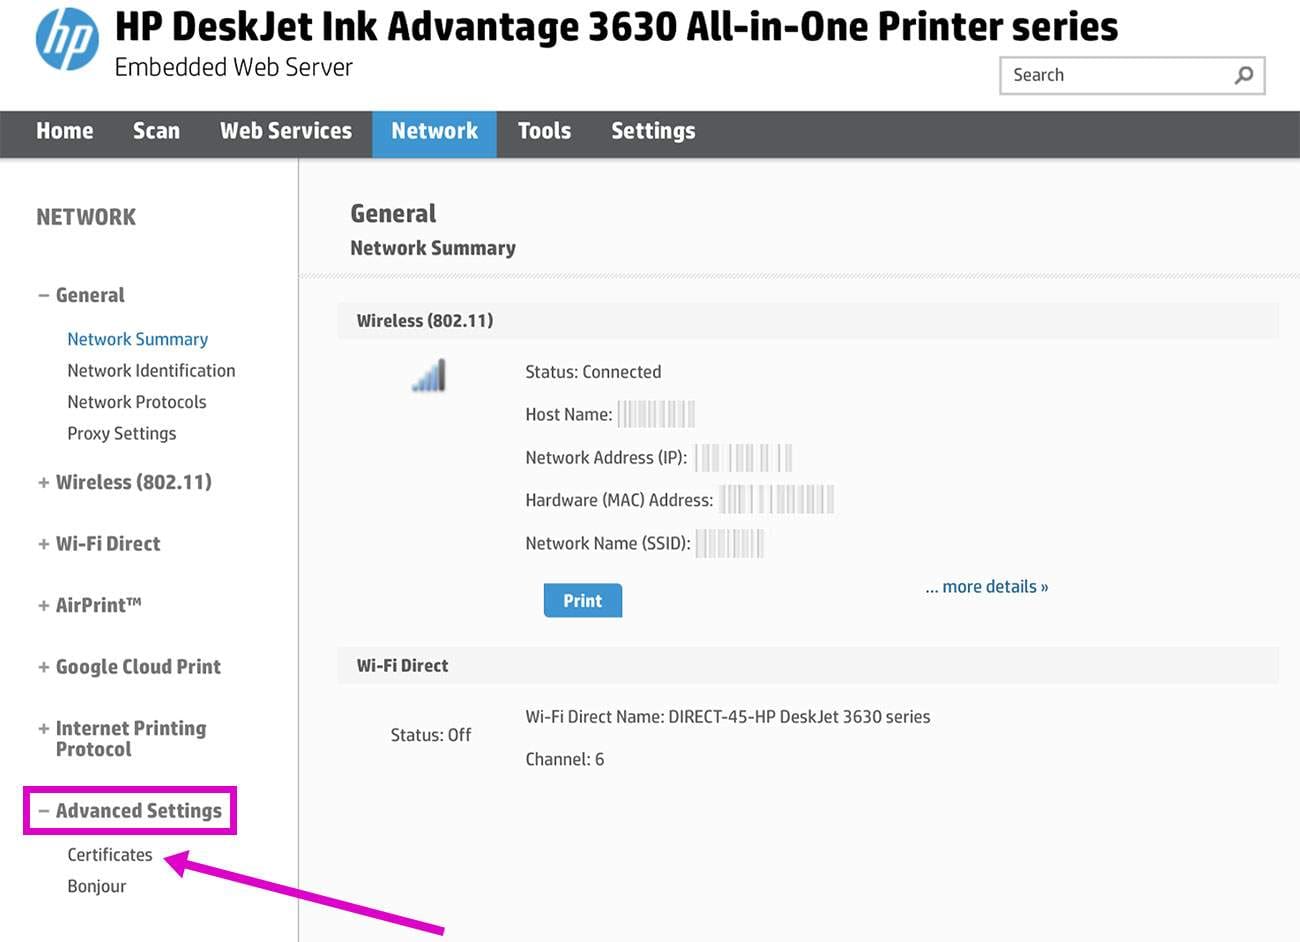 Fixes for No AirPrint Printers Found - 9